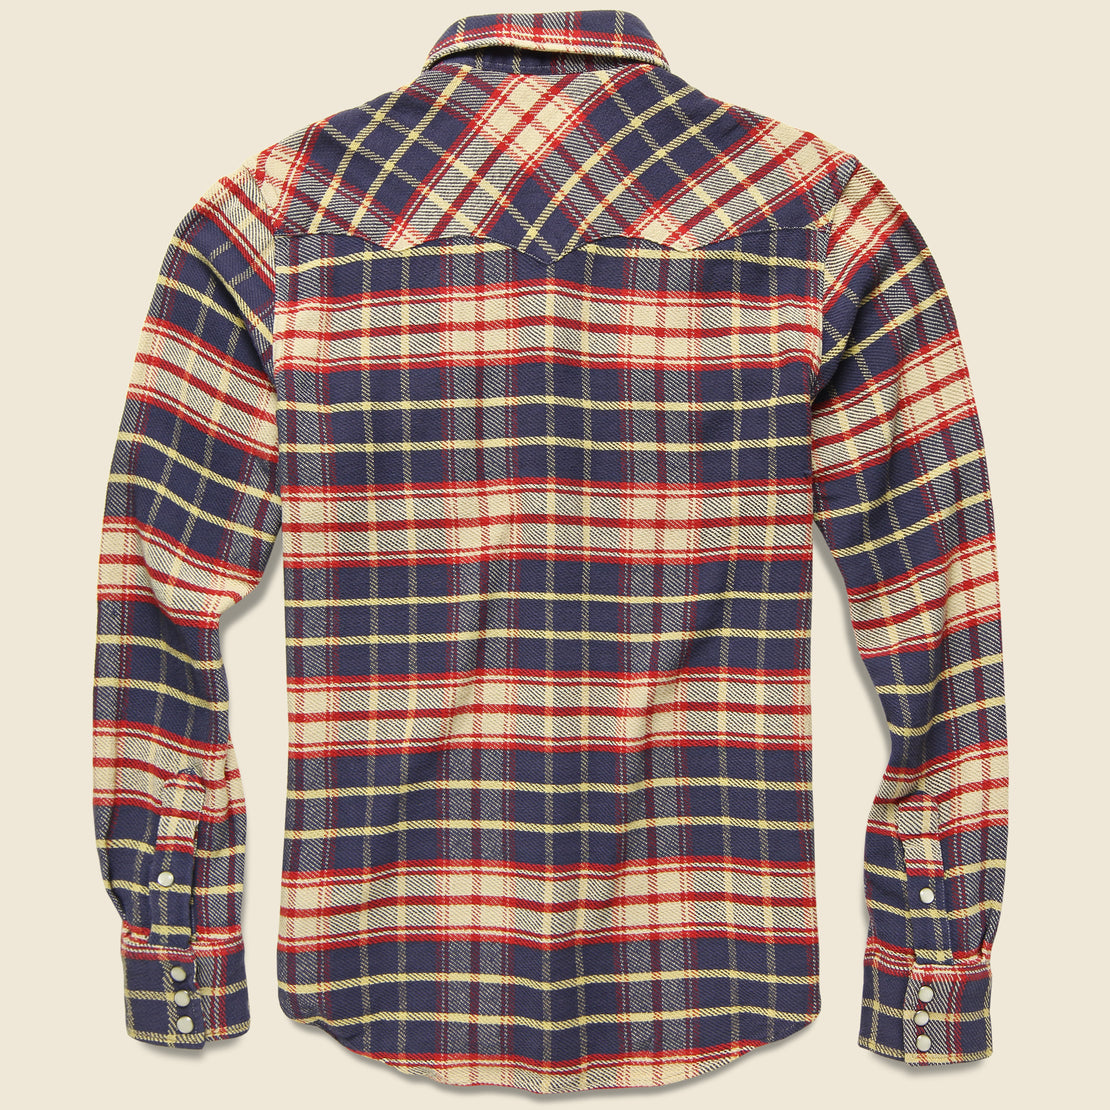 Chunky Buffalo Western - Navy/Red Plaid - RRL - STAG Provisions - Tops - L/S Woven - Overshirt